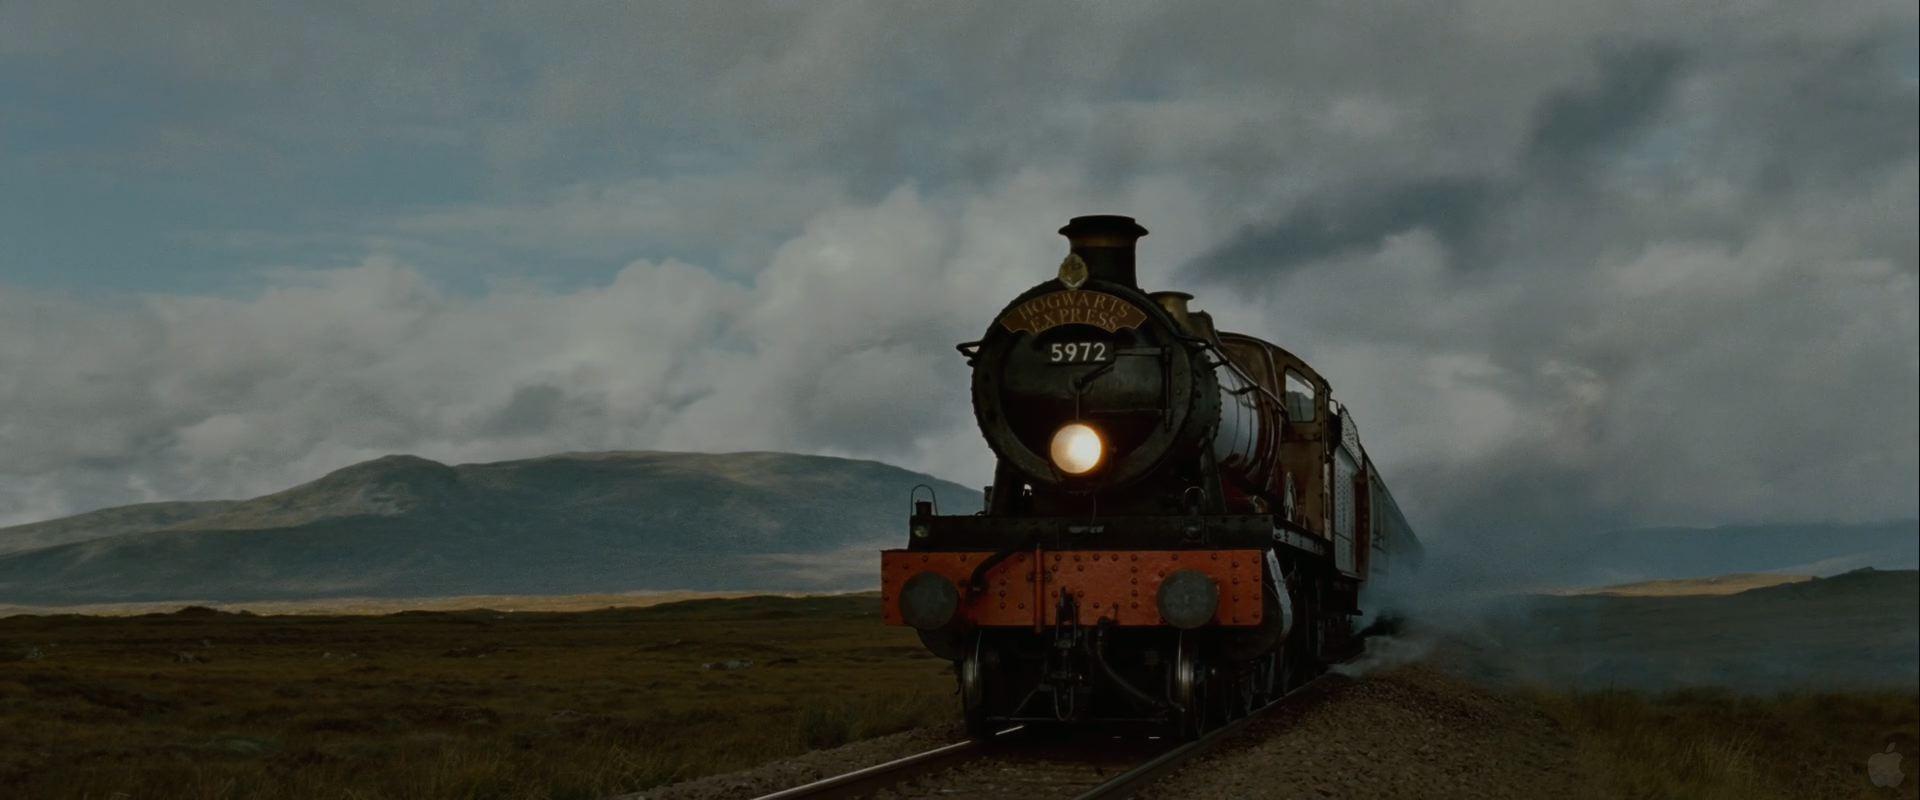 Hogwarts Express Train from Harry Potter and the Deathly Hallows